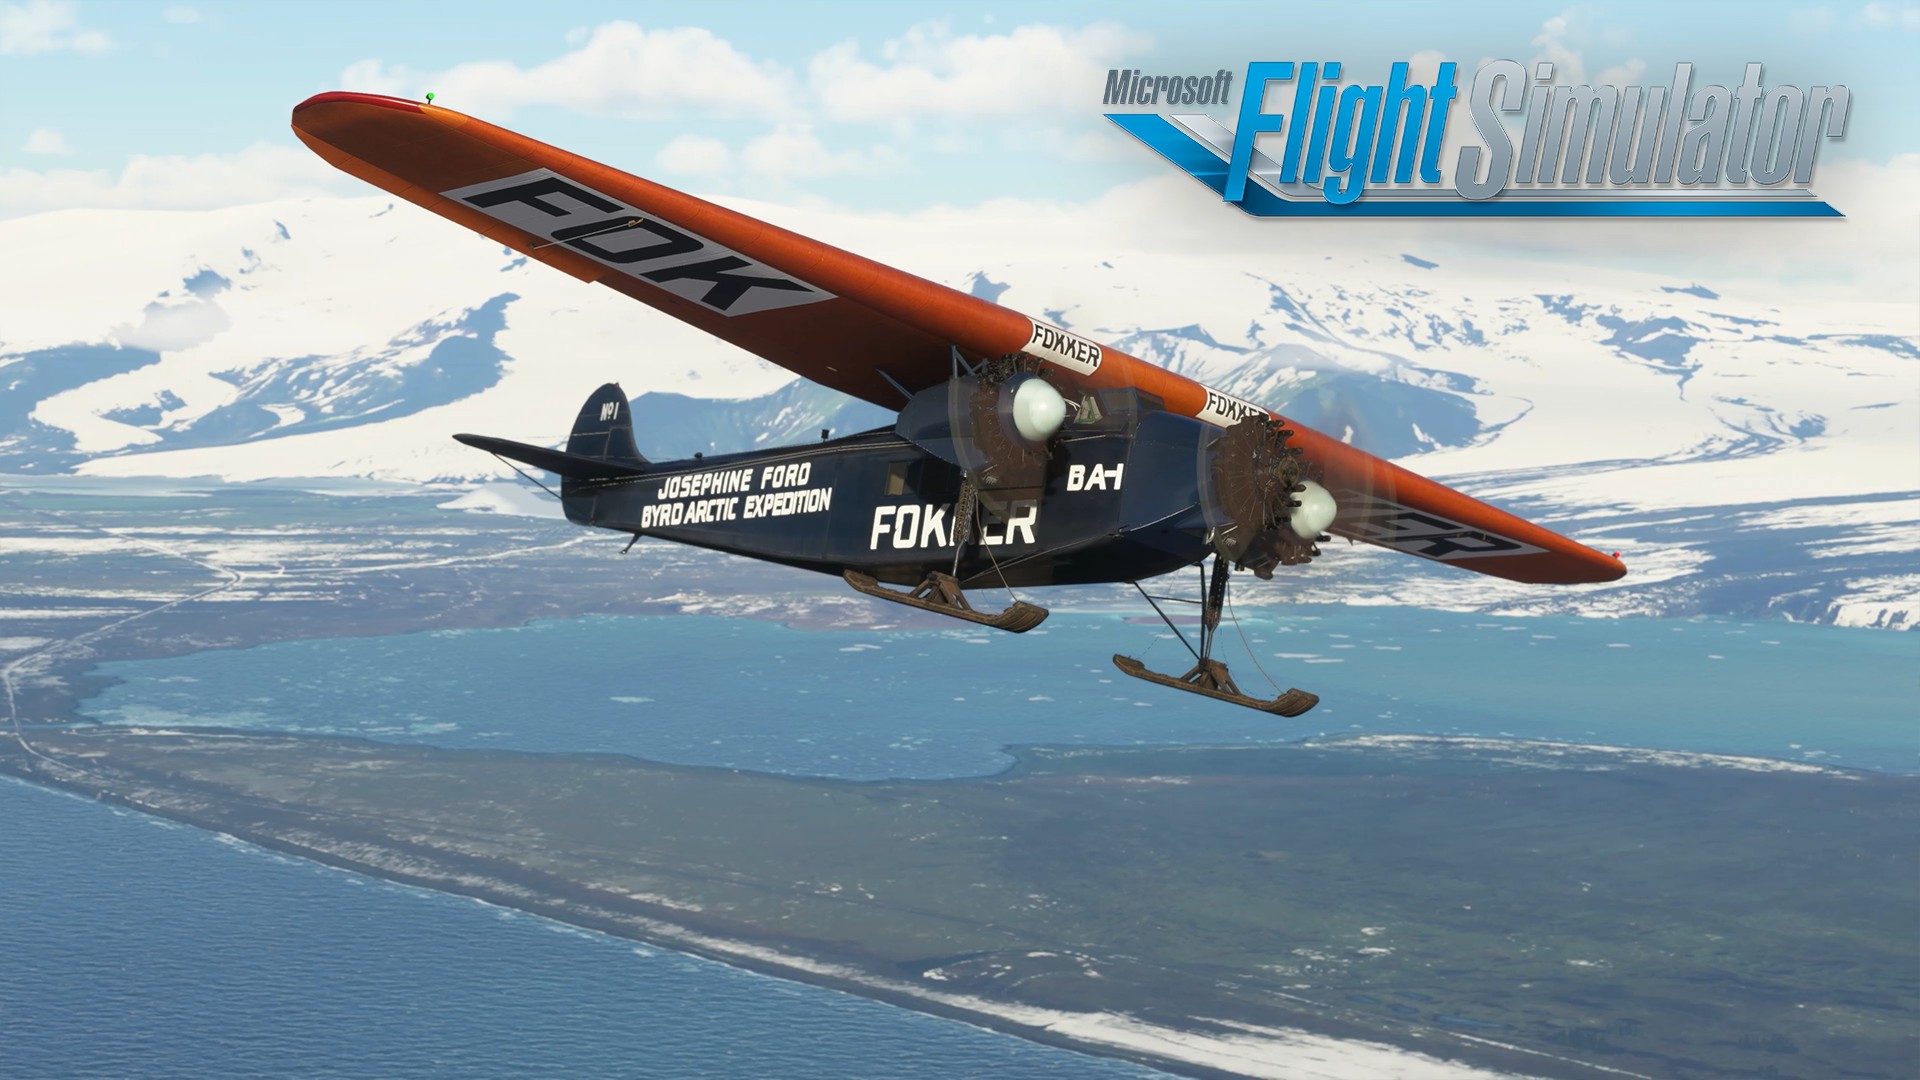 Video For Microsoft Flight Simulator Releases New Aircraft in the “Local Legends” Series Today with Fokker F. VII